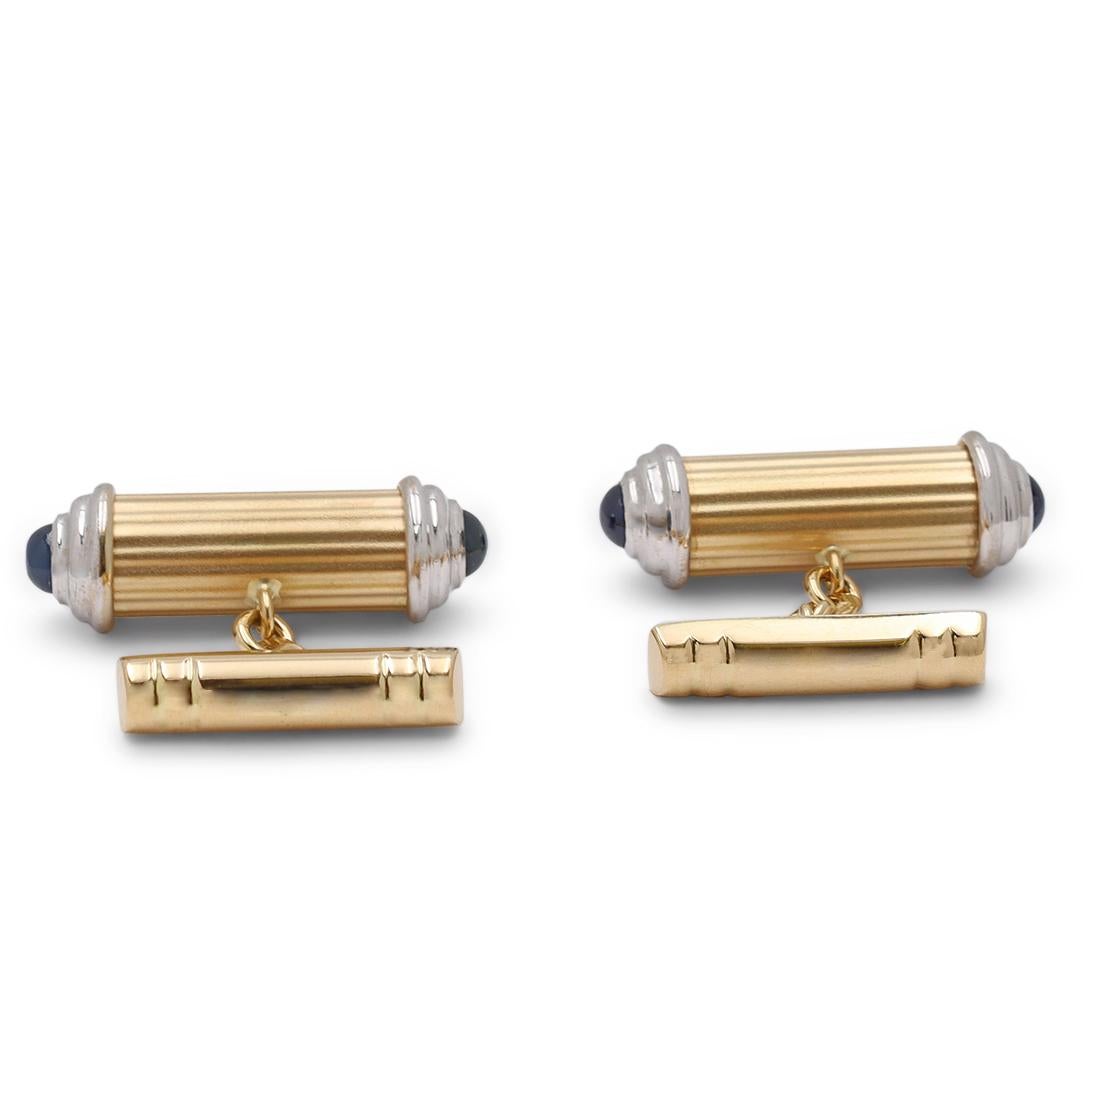 A pair of cufflinks crafted in 18 karat white and yellow gold. Ribbed matte gold cylinders are capped with white gold ends and finished with cabochon sapphires. Cufflinks are presented without box and papers. CIRCA 1980s.

Box: No
Papers: No